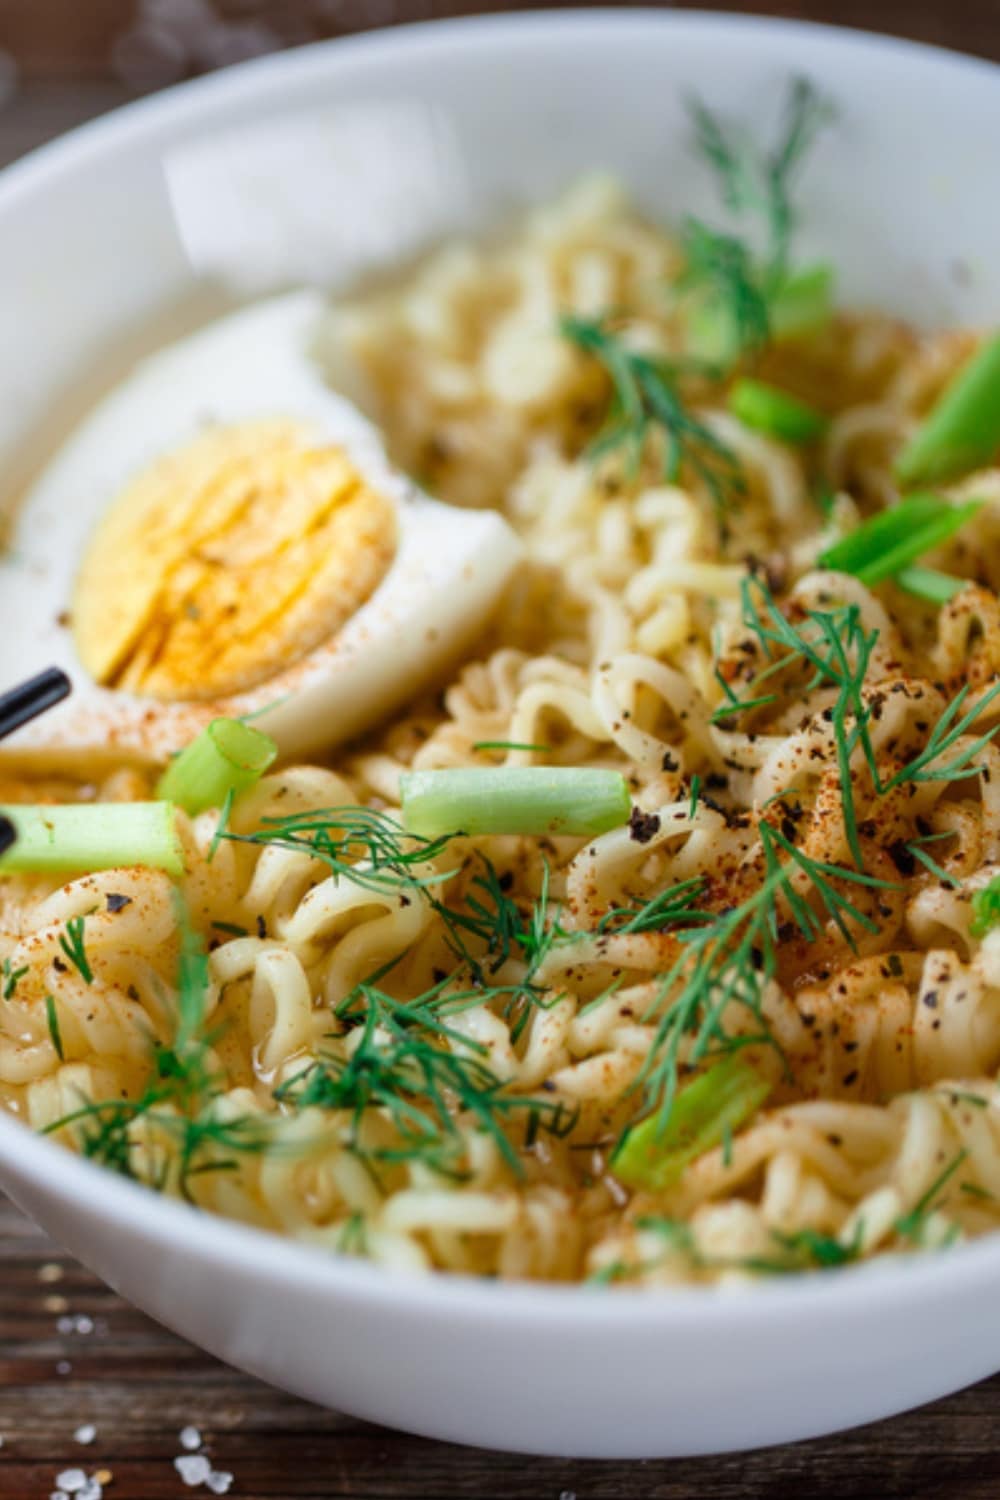 Ramen Noodles With Sliced Green Onions and Hard-Boiled Eggs